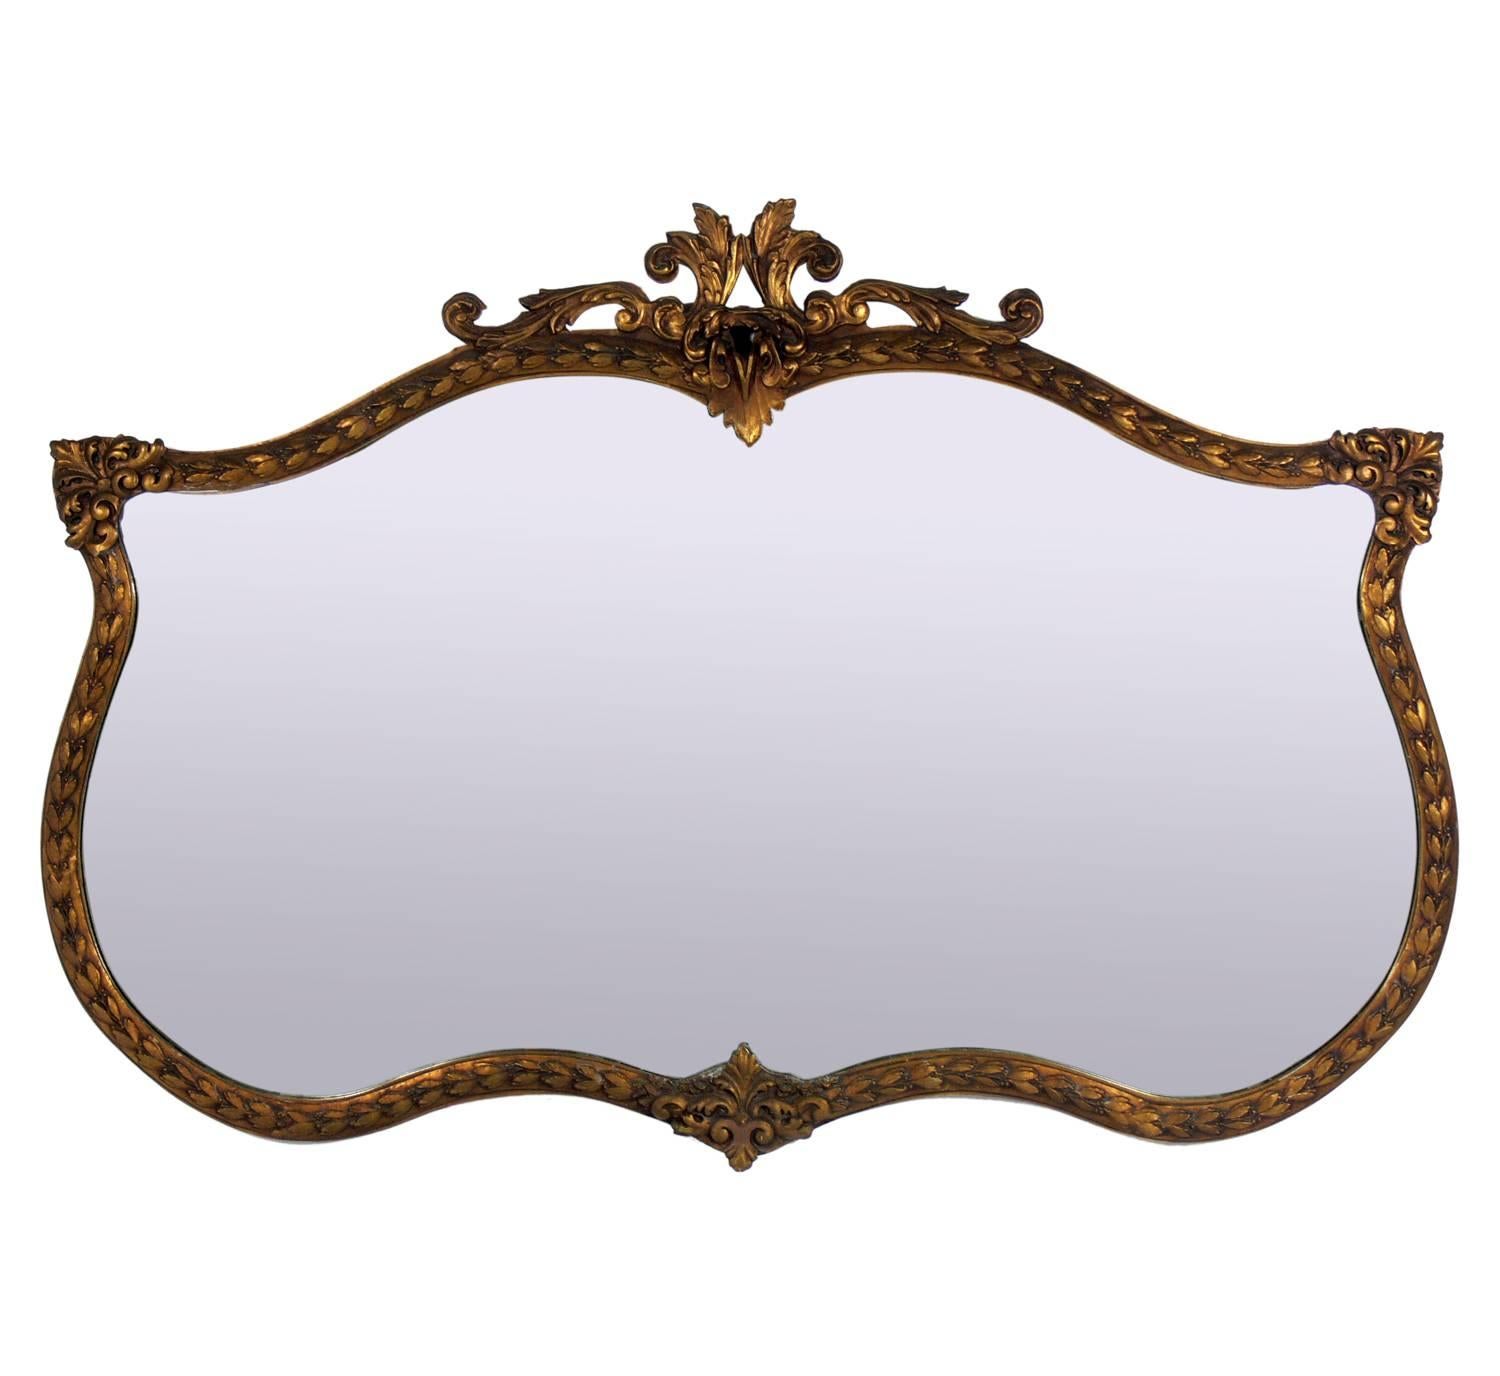 Large-Scale Ornate Gilt Mirror For Sale